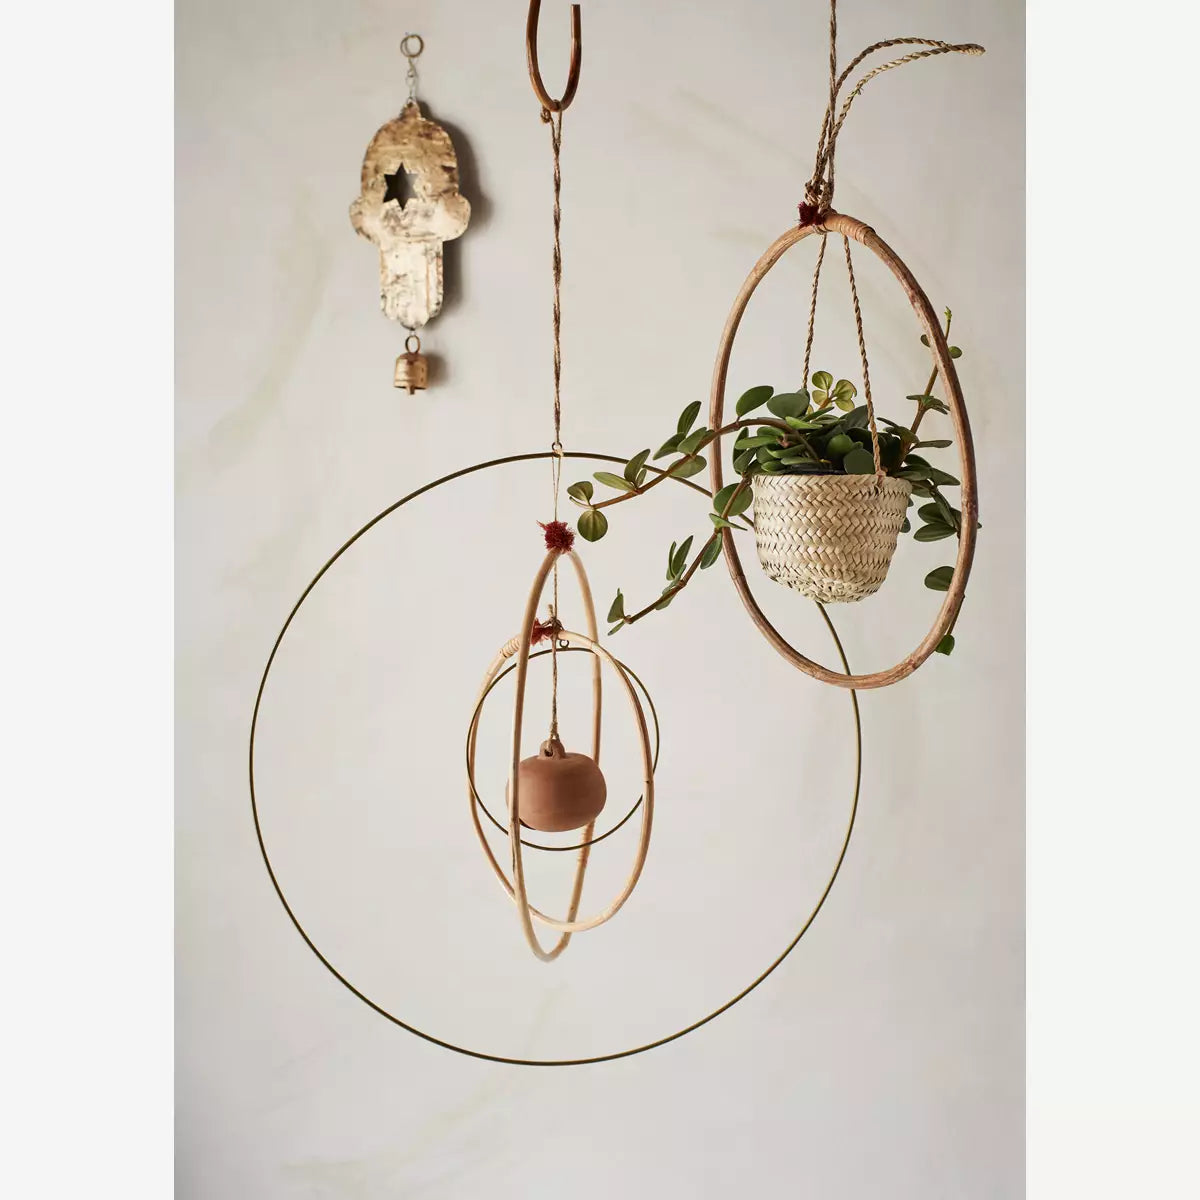 Interiors image of the straw hanging basket hung inside a bamboo ring and alongside a brass ring and other decorative home accessories.